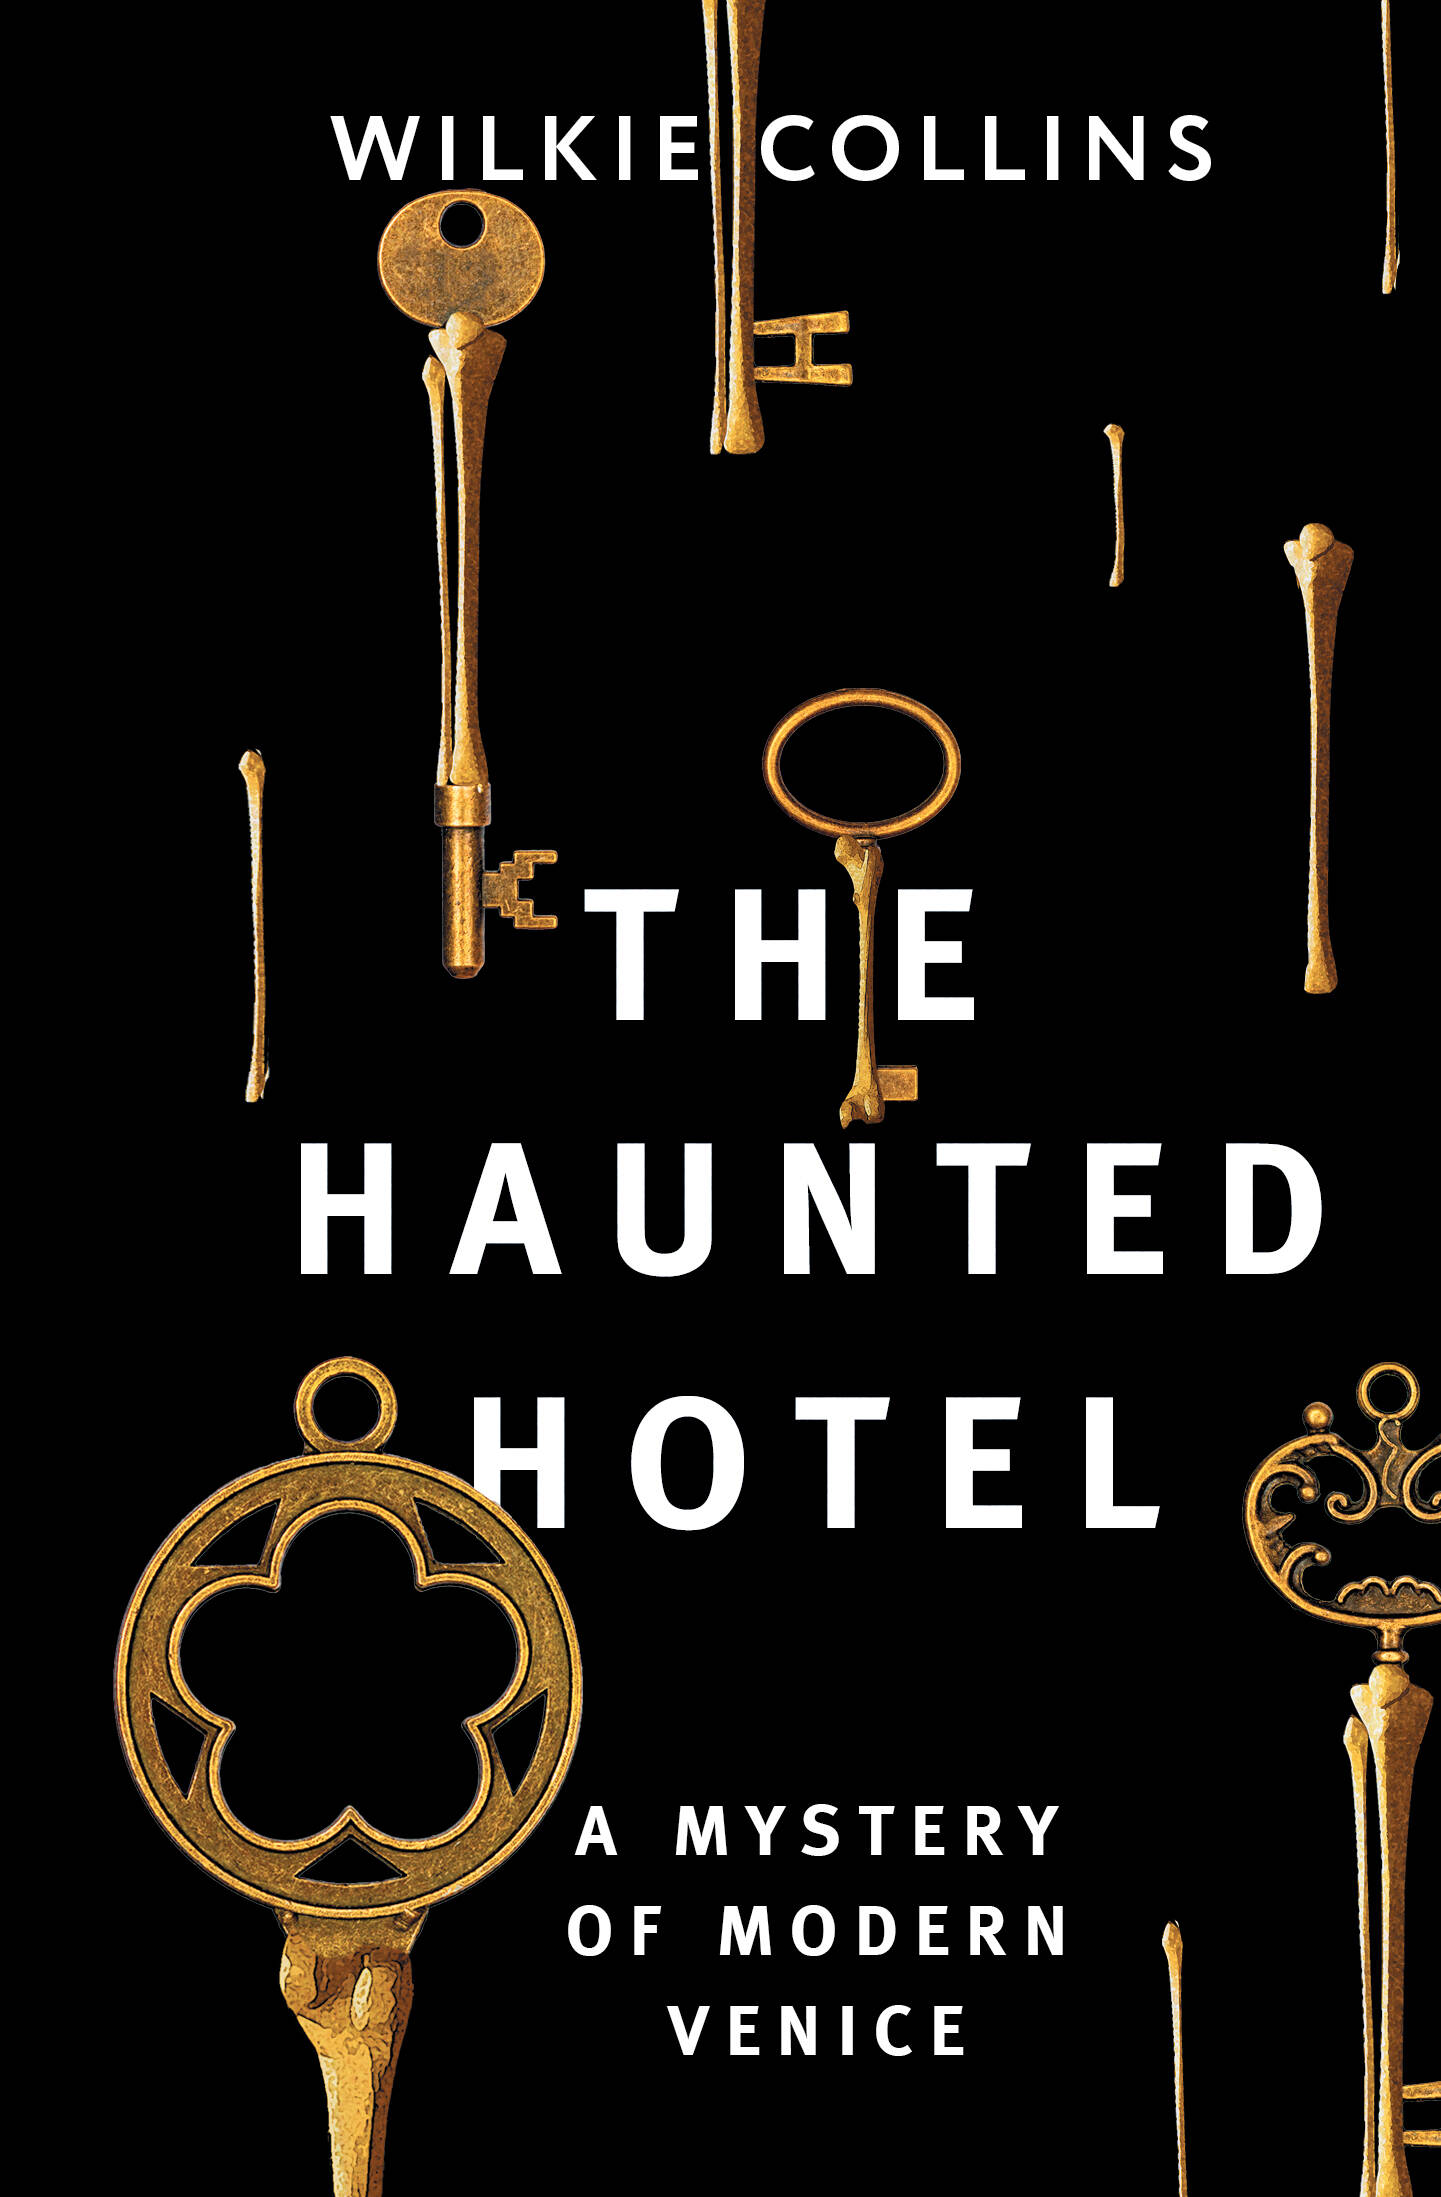 Collins Wilkie The Haunted Hotel: A Mystery of Modern Venice